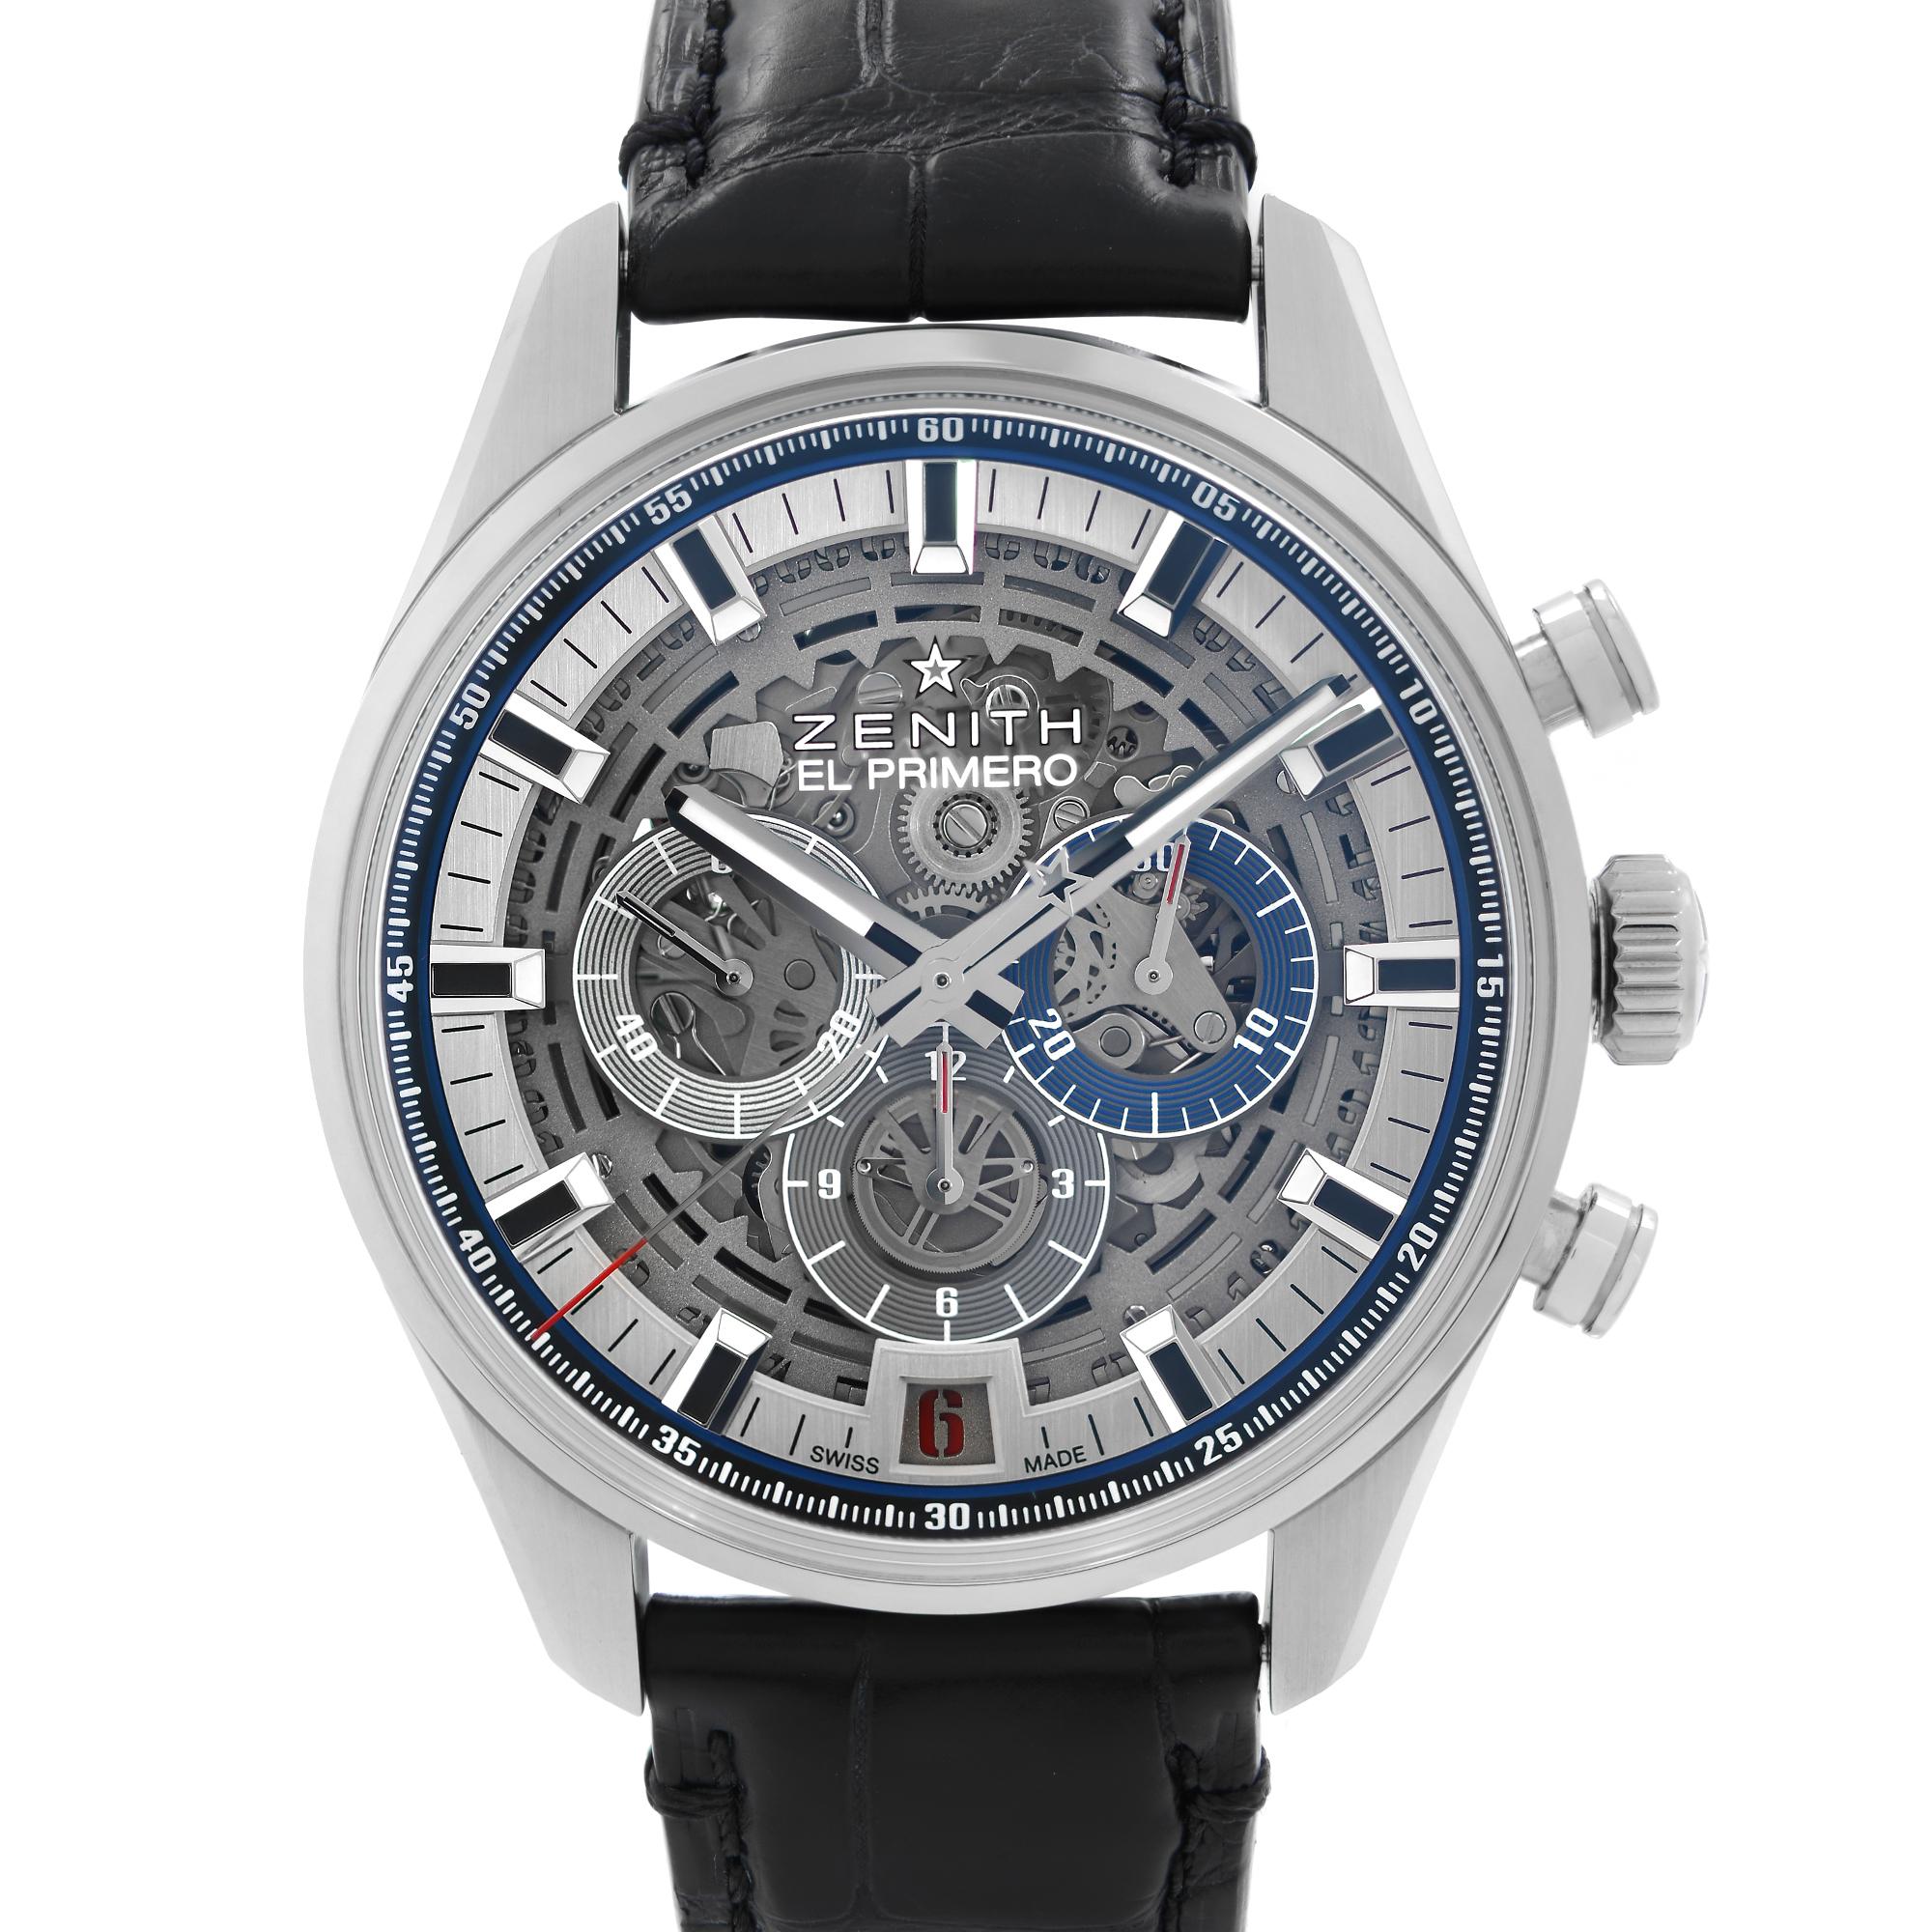 Pre-owned Like New Zenith El Primero Steel Chronograph Skeleton Dial Men Watch 03.2081.400/78.C813. This Beautiful Timepiece Is Powered by a Mechanical (Automatic) Movement and Features: Stainless Steel Case with a Black Leather Strap. Fixed